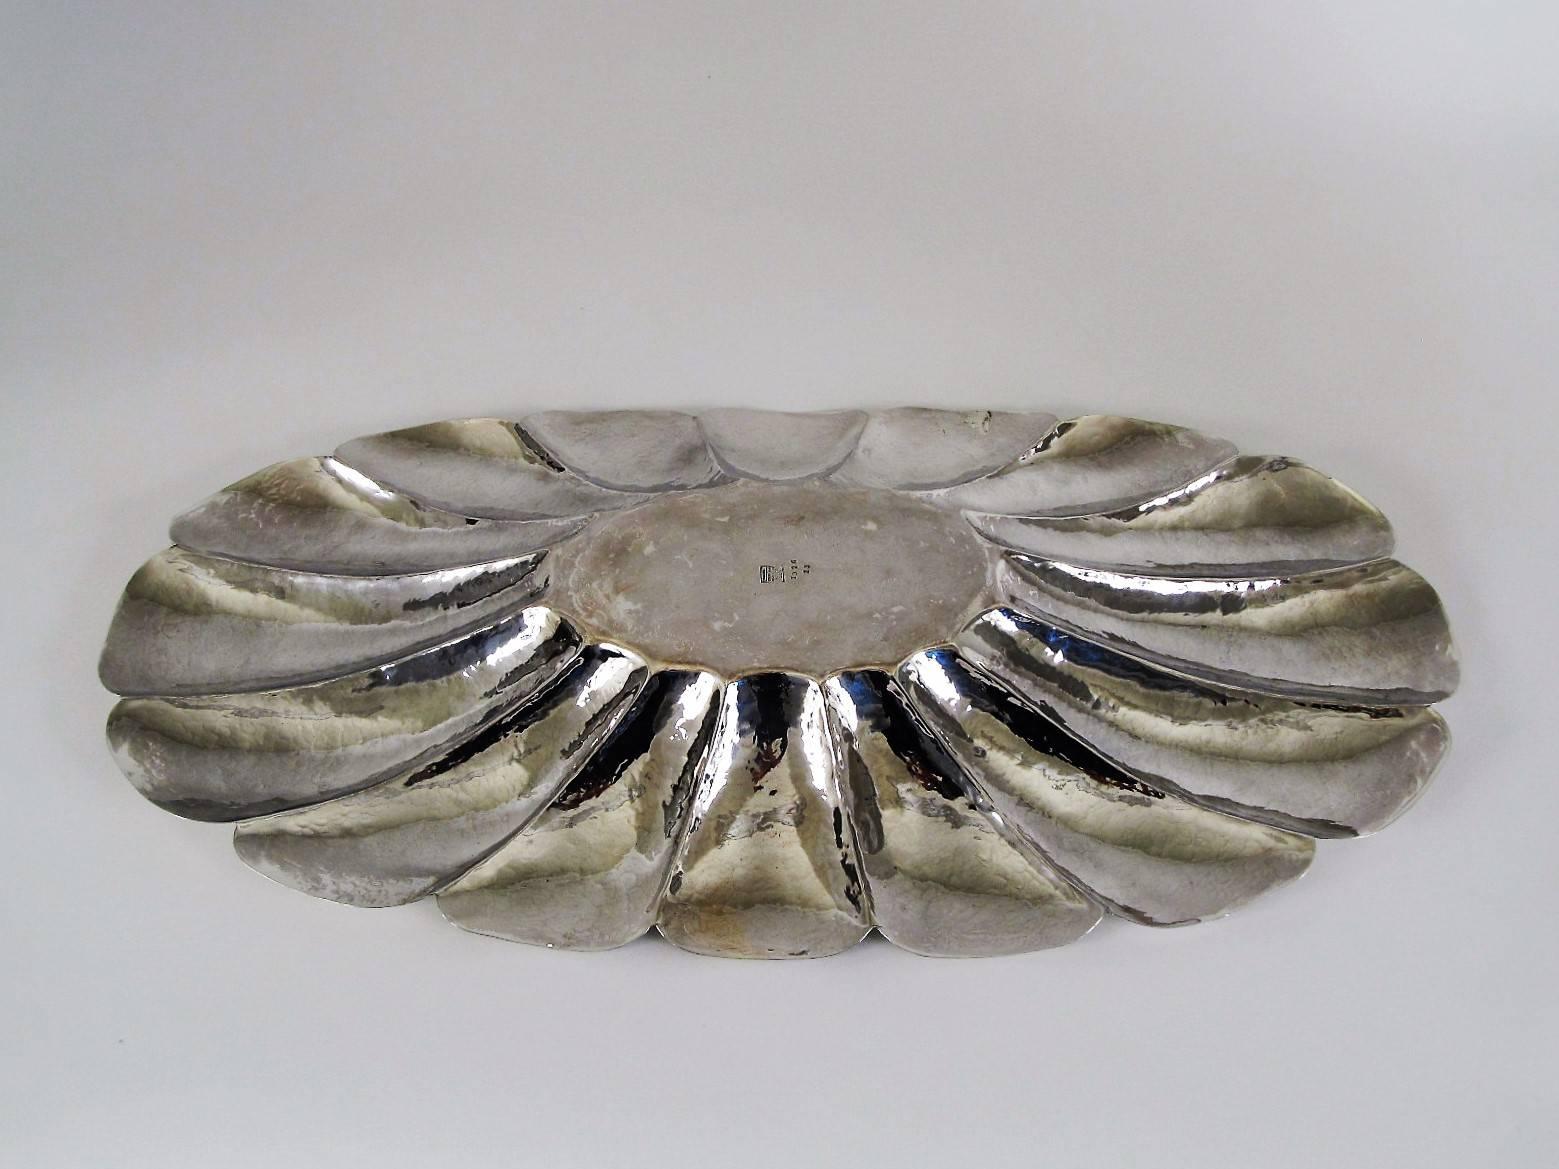 Large Sterling Silver Centerpiece Bowl by L. Maciel, Mexico In Excellent Condition For Sale In Papaikou, HI